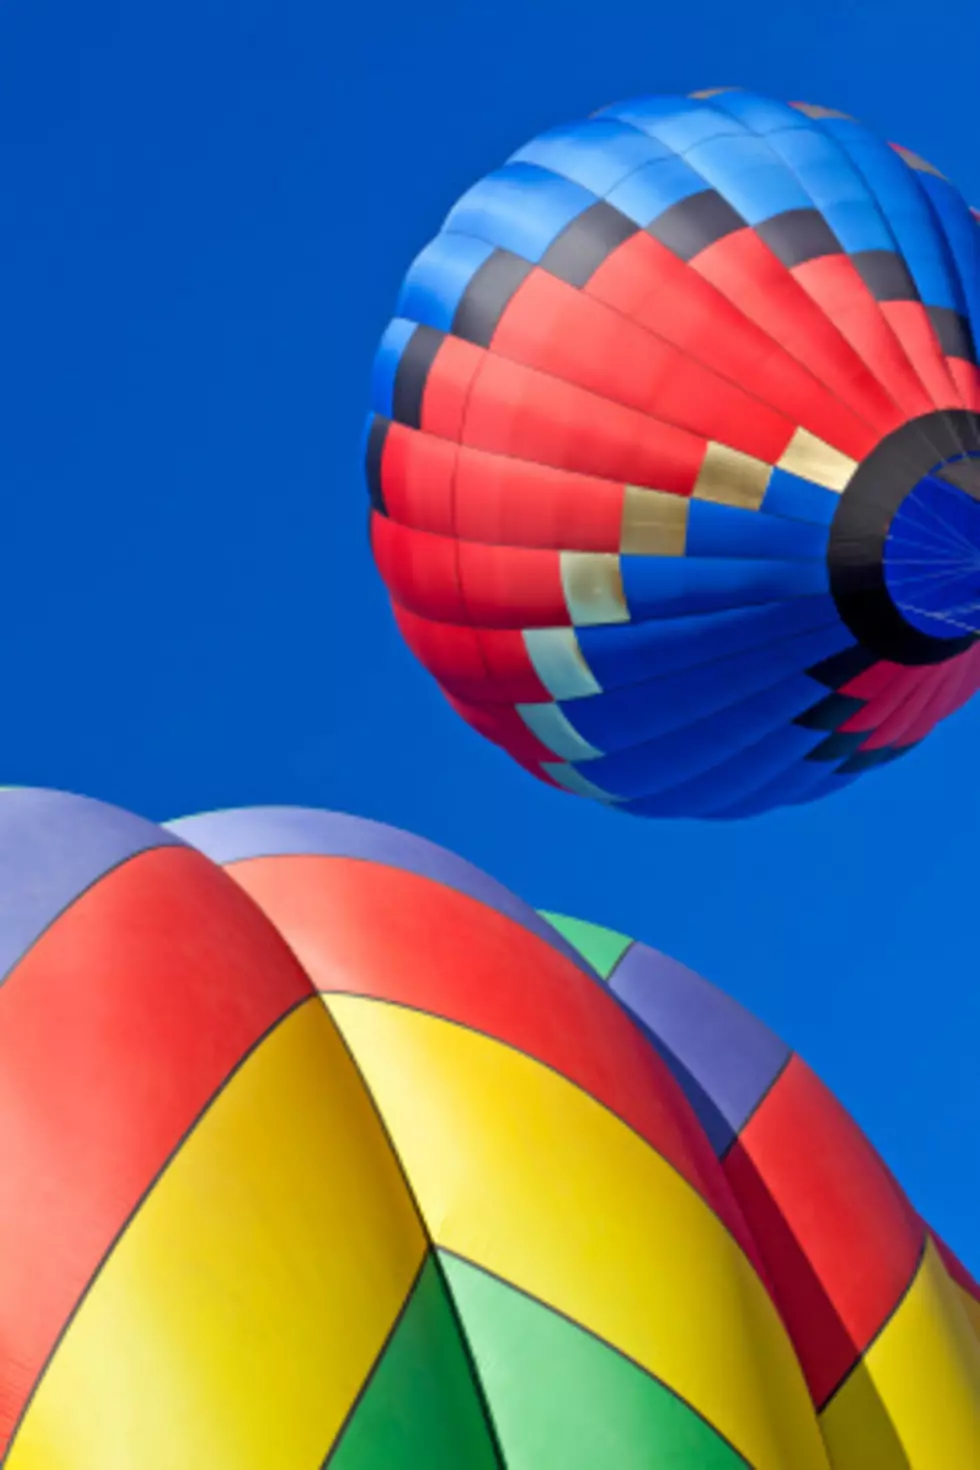 Join B98.5 This Saturday At The Great Falls Balloon Festival